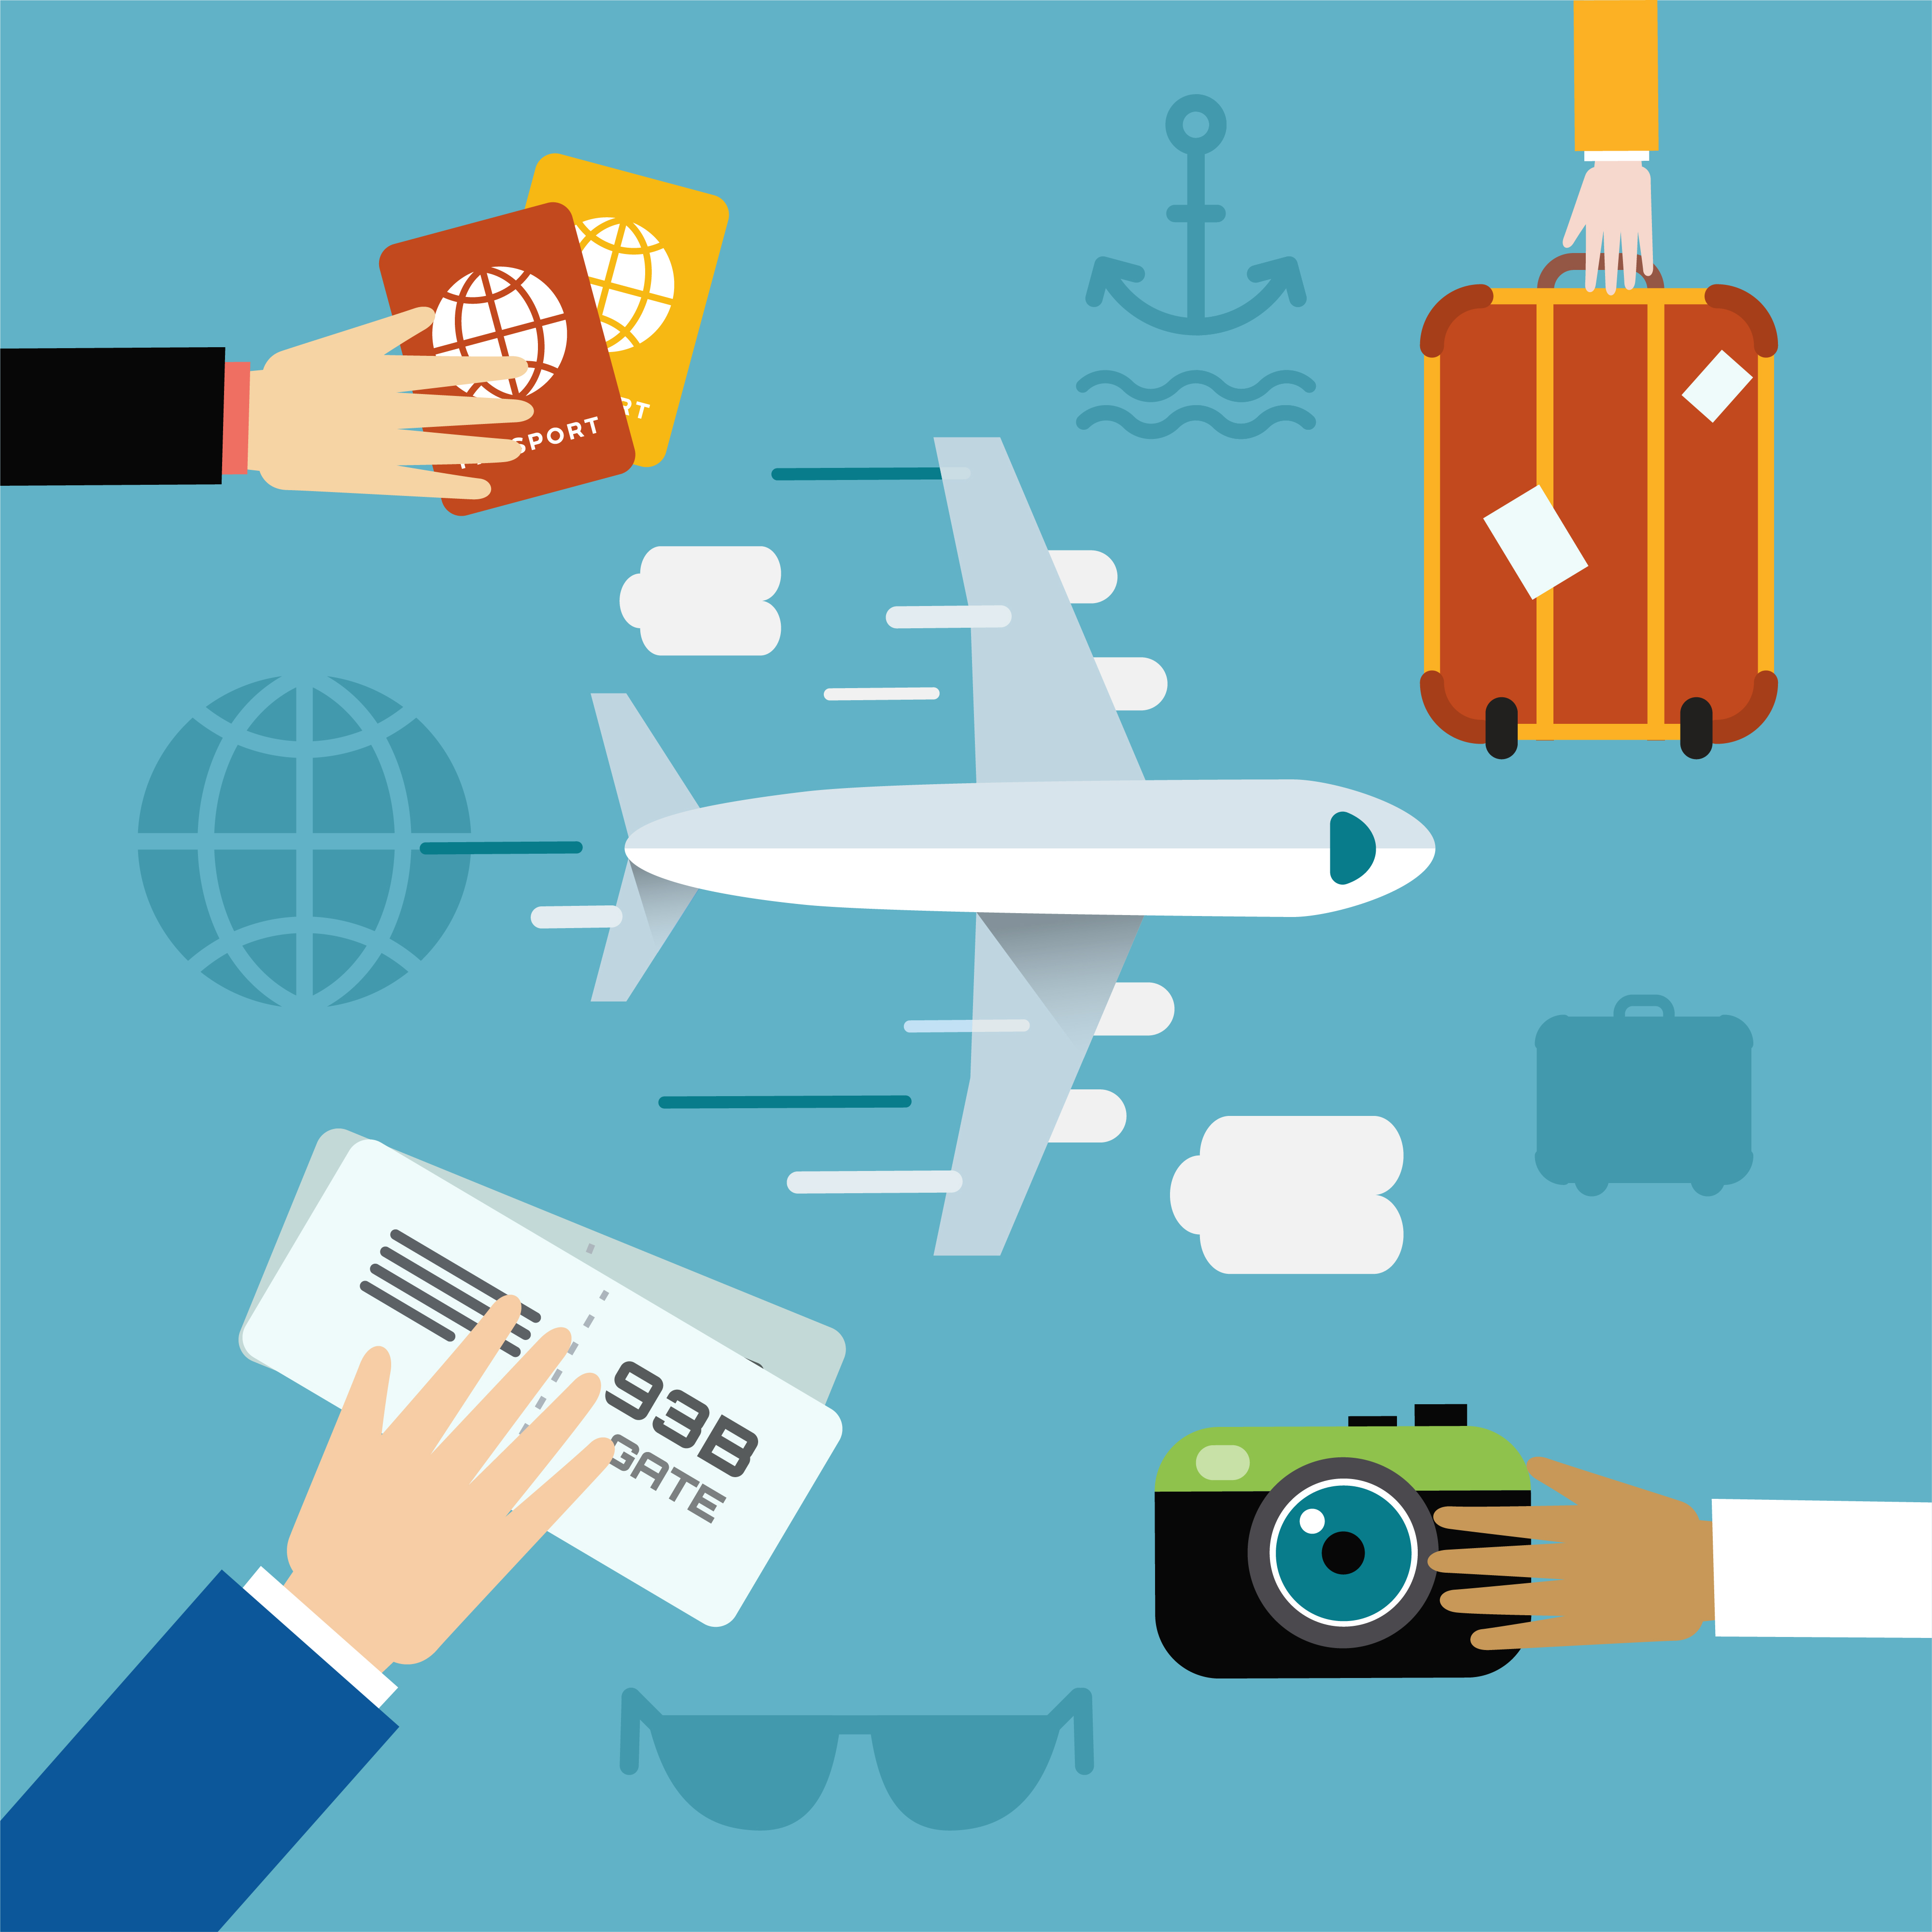 Free vector illustration of airplane flying and some travel tools Photoshop brush